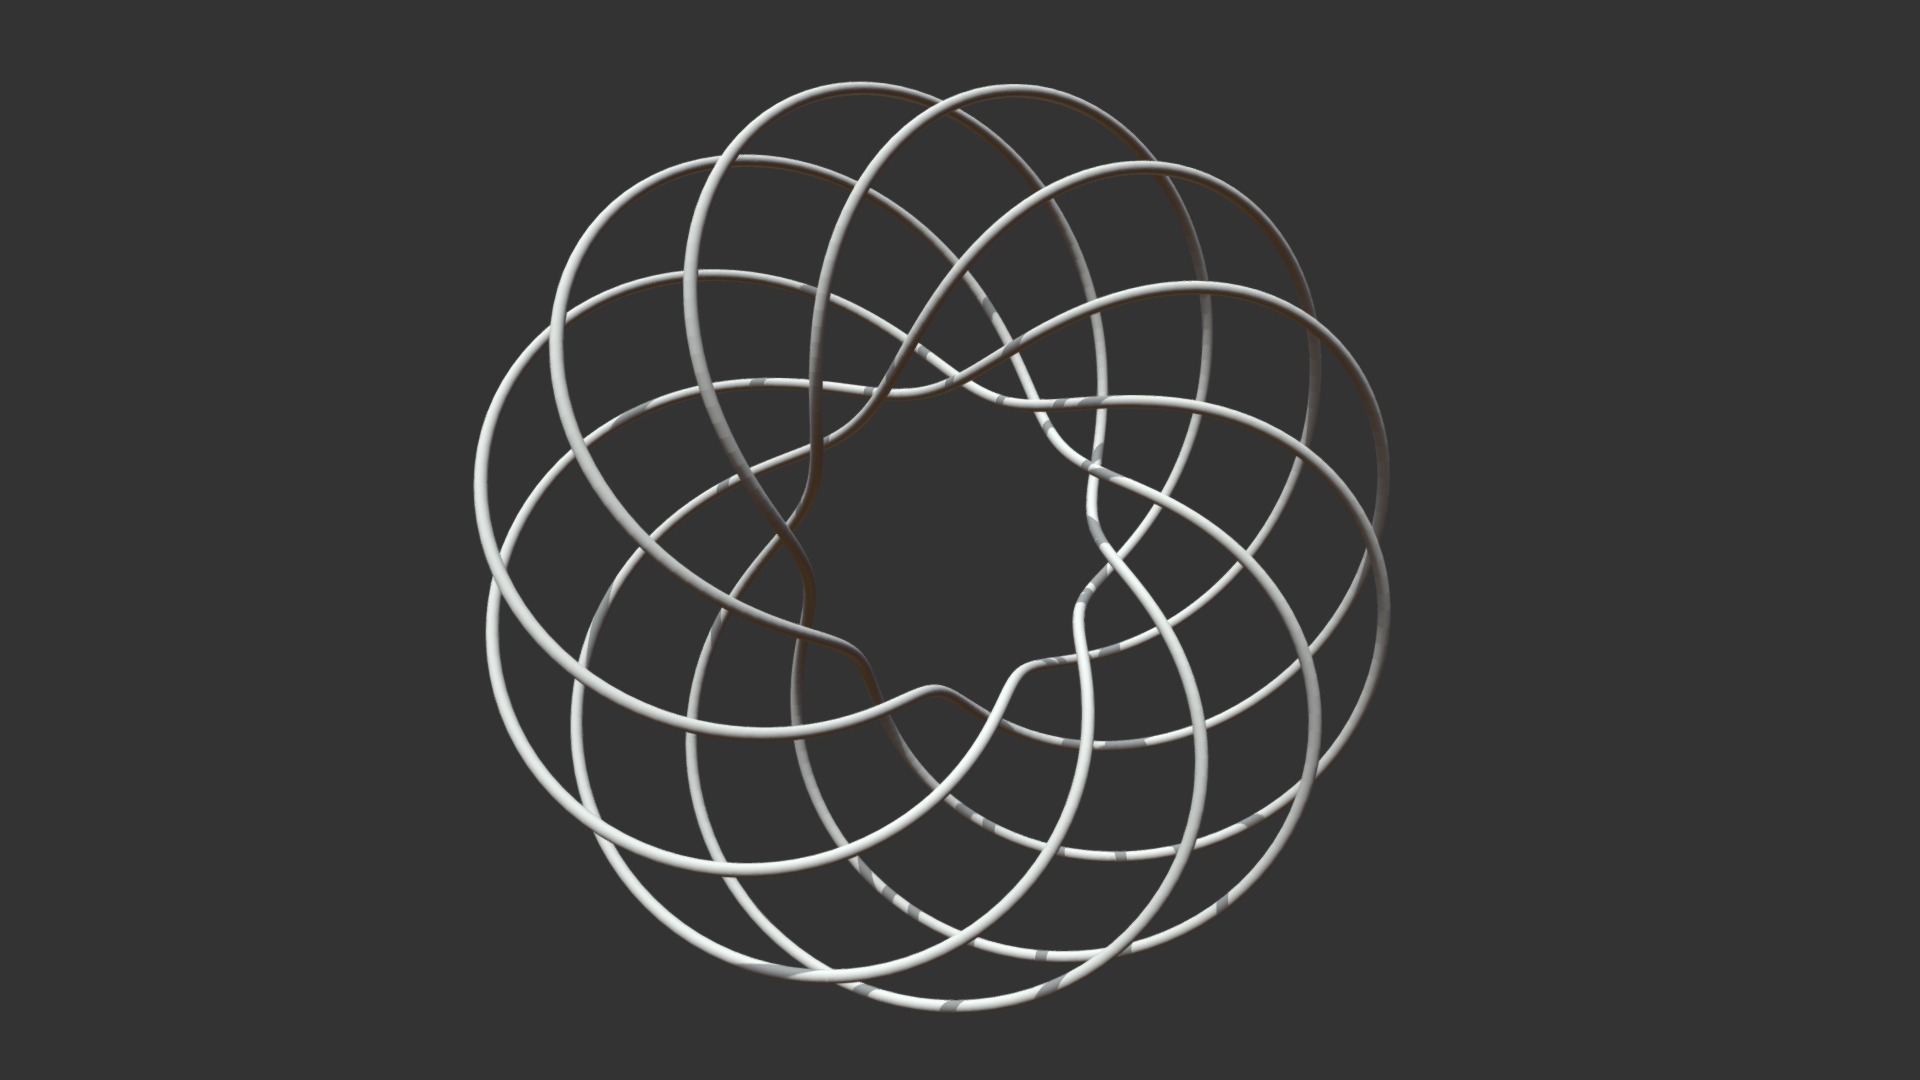 3D model Torus knot 6,11 r=1 - This is a 3D model of the Torus knot 6,11 r=1. The 3D model is about a black and white image of a circle with a black background.